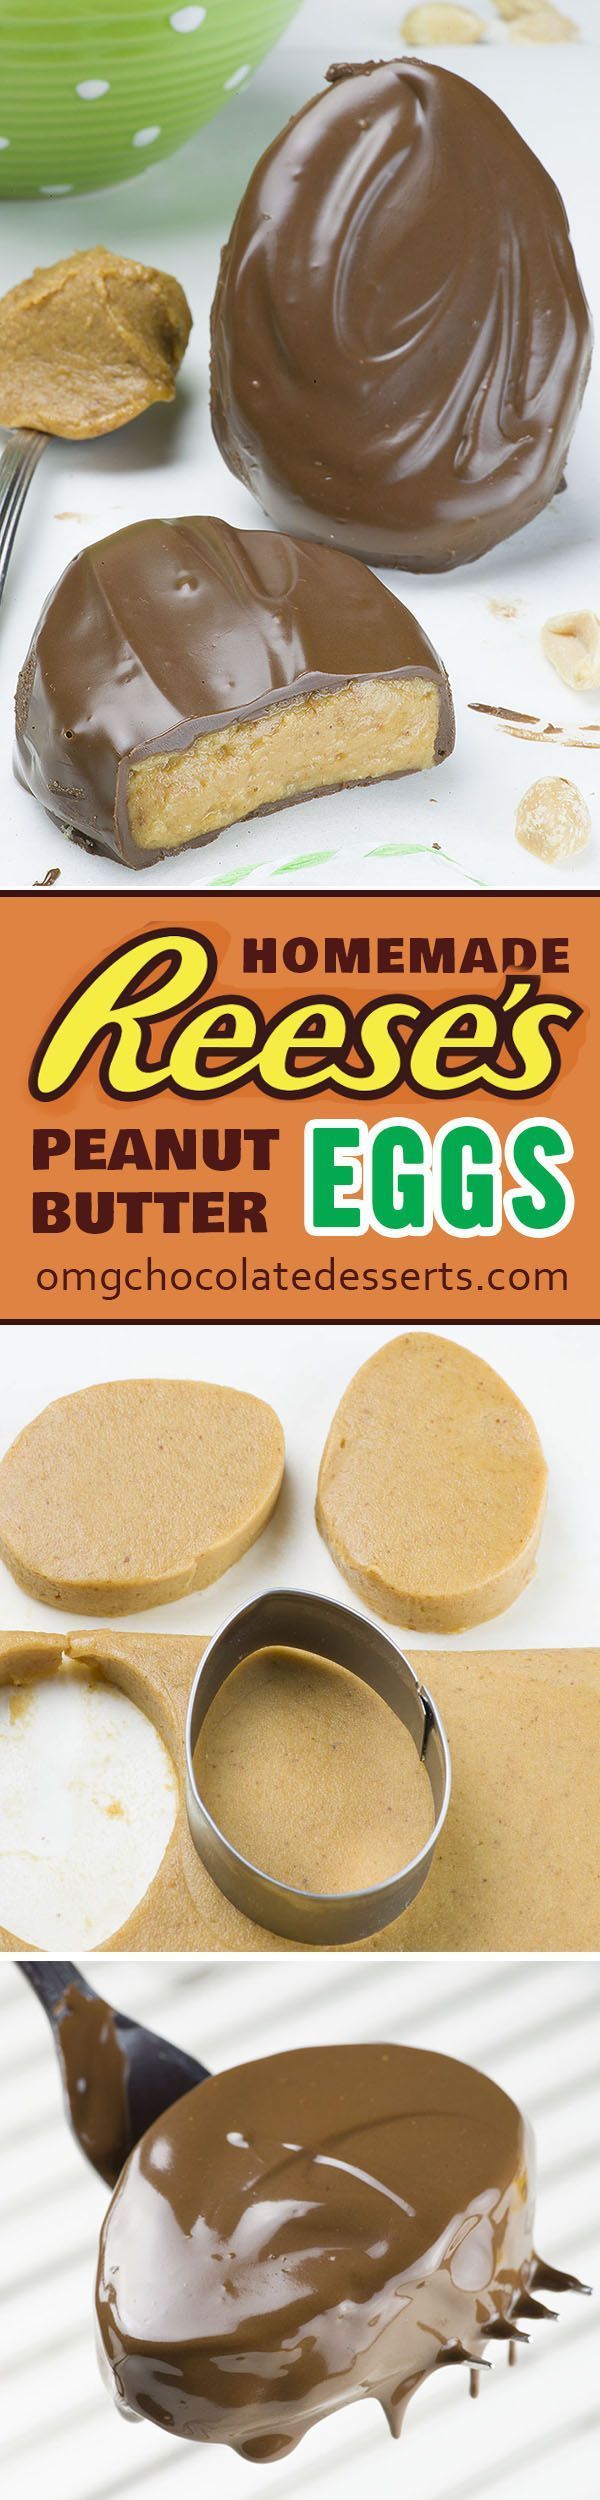 Homemade Reese’s Eggs – simple, quick and easy no bake dessert recipe with peanut butter and chocolate , is perfect idea for